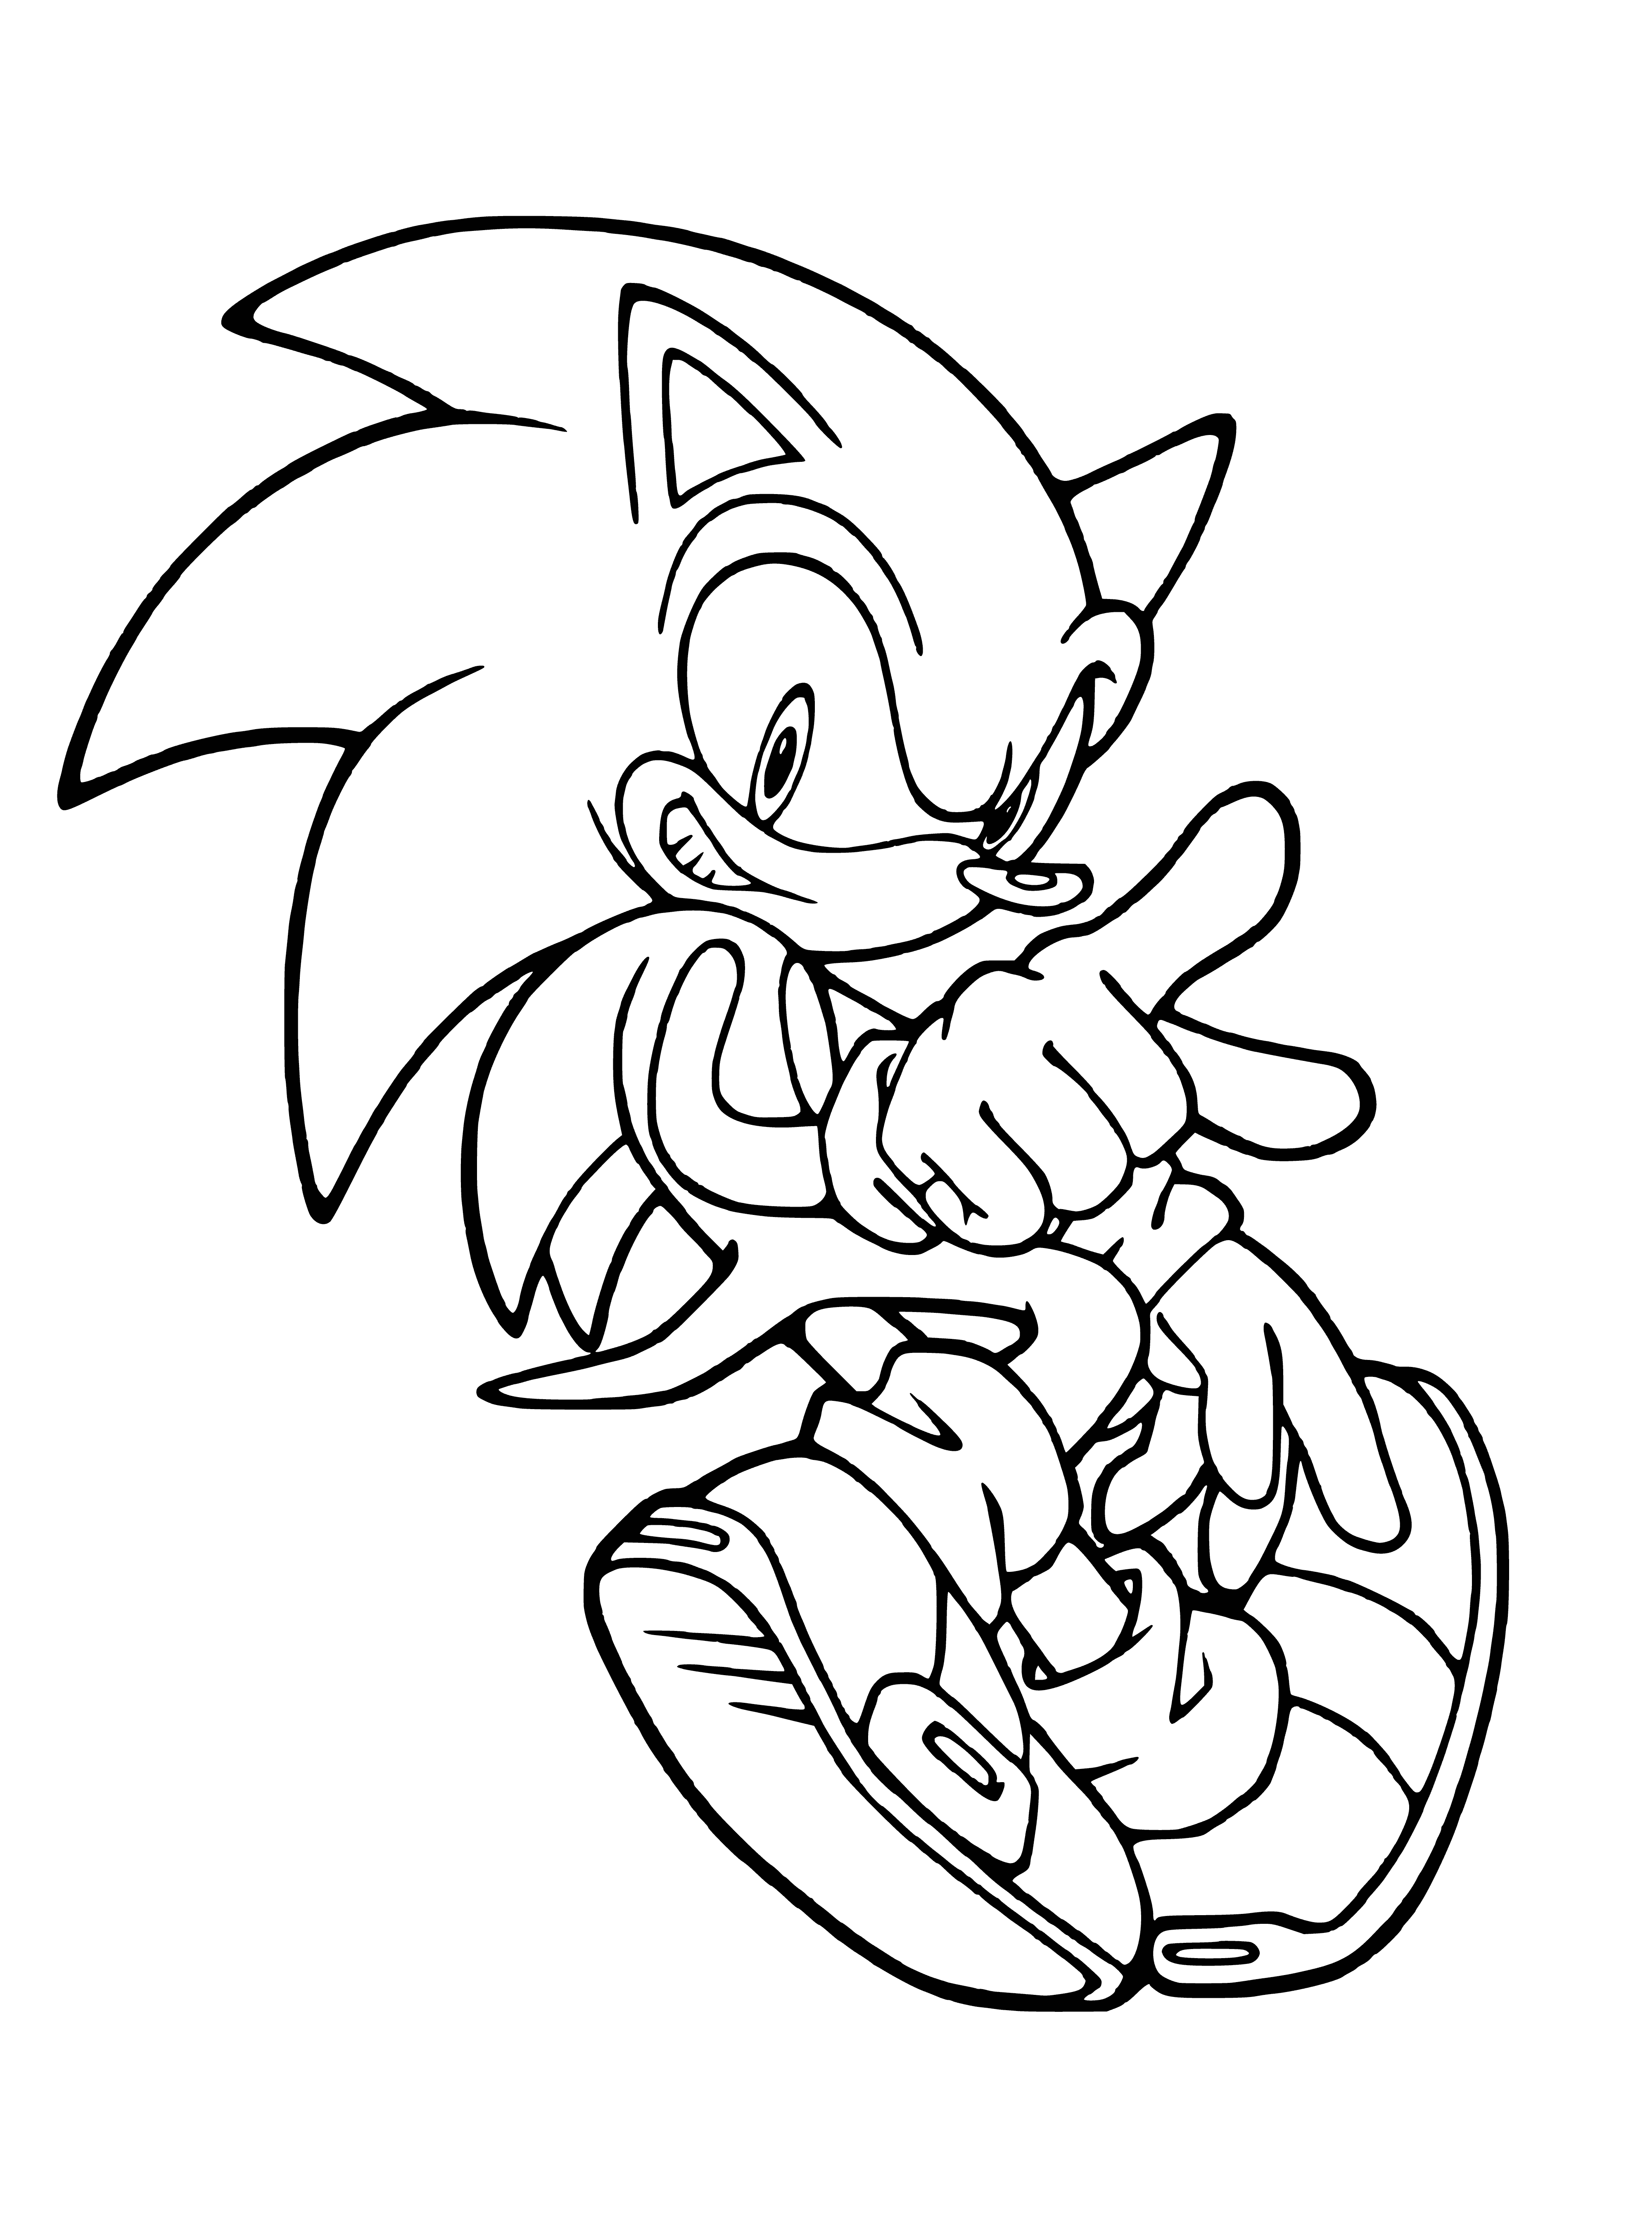 coloring page: Sonic the Hedgehog from Sonic X faces off against evil Dr. Eggman in a coloring page filled with super speed!